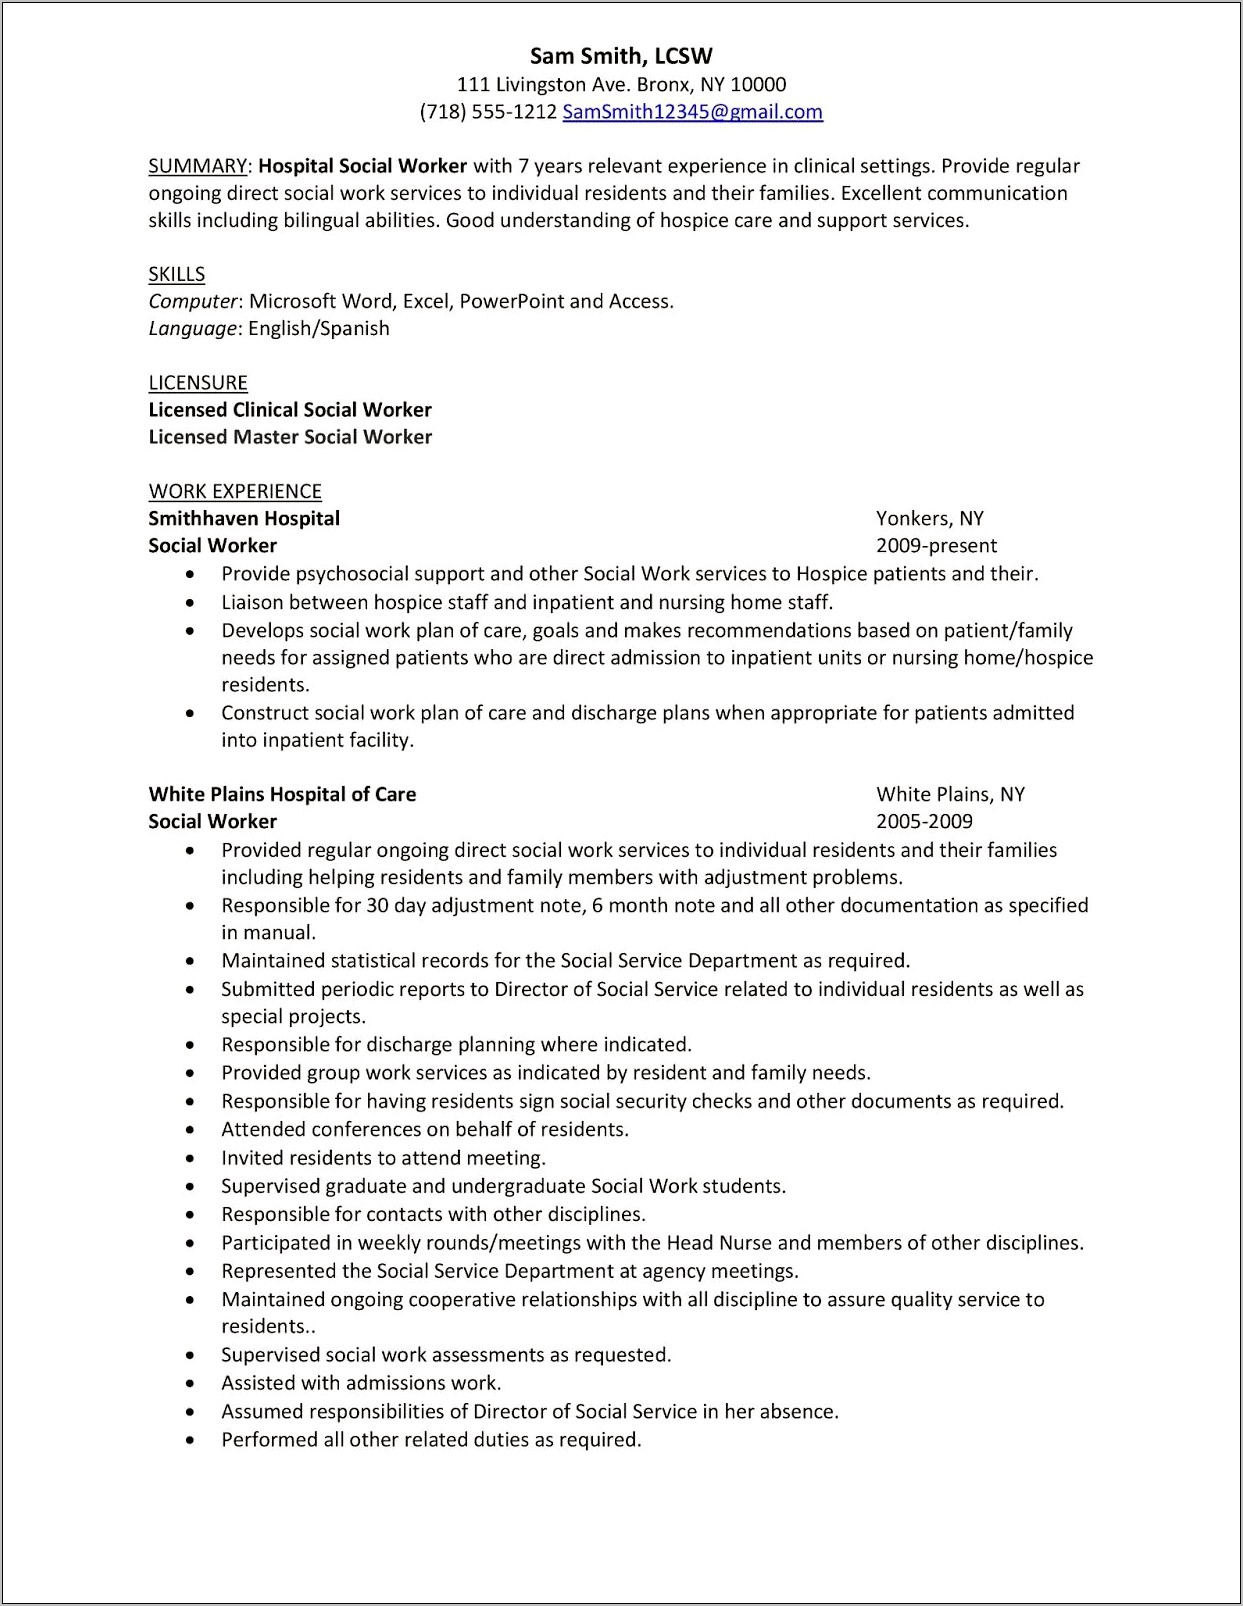 Sample Resume For Cps Worker